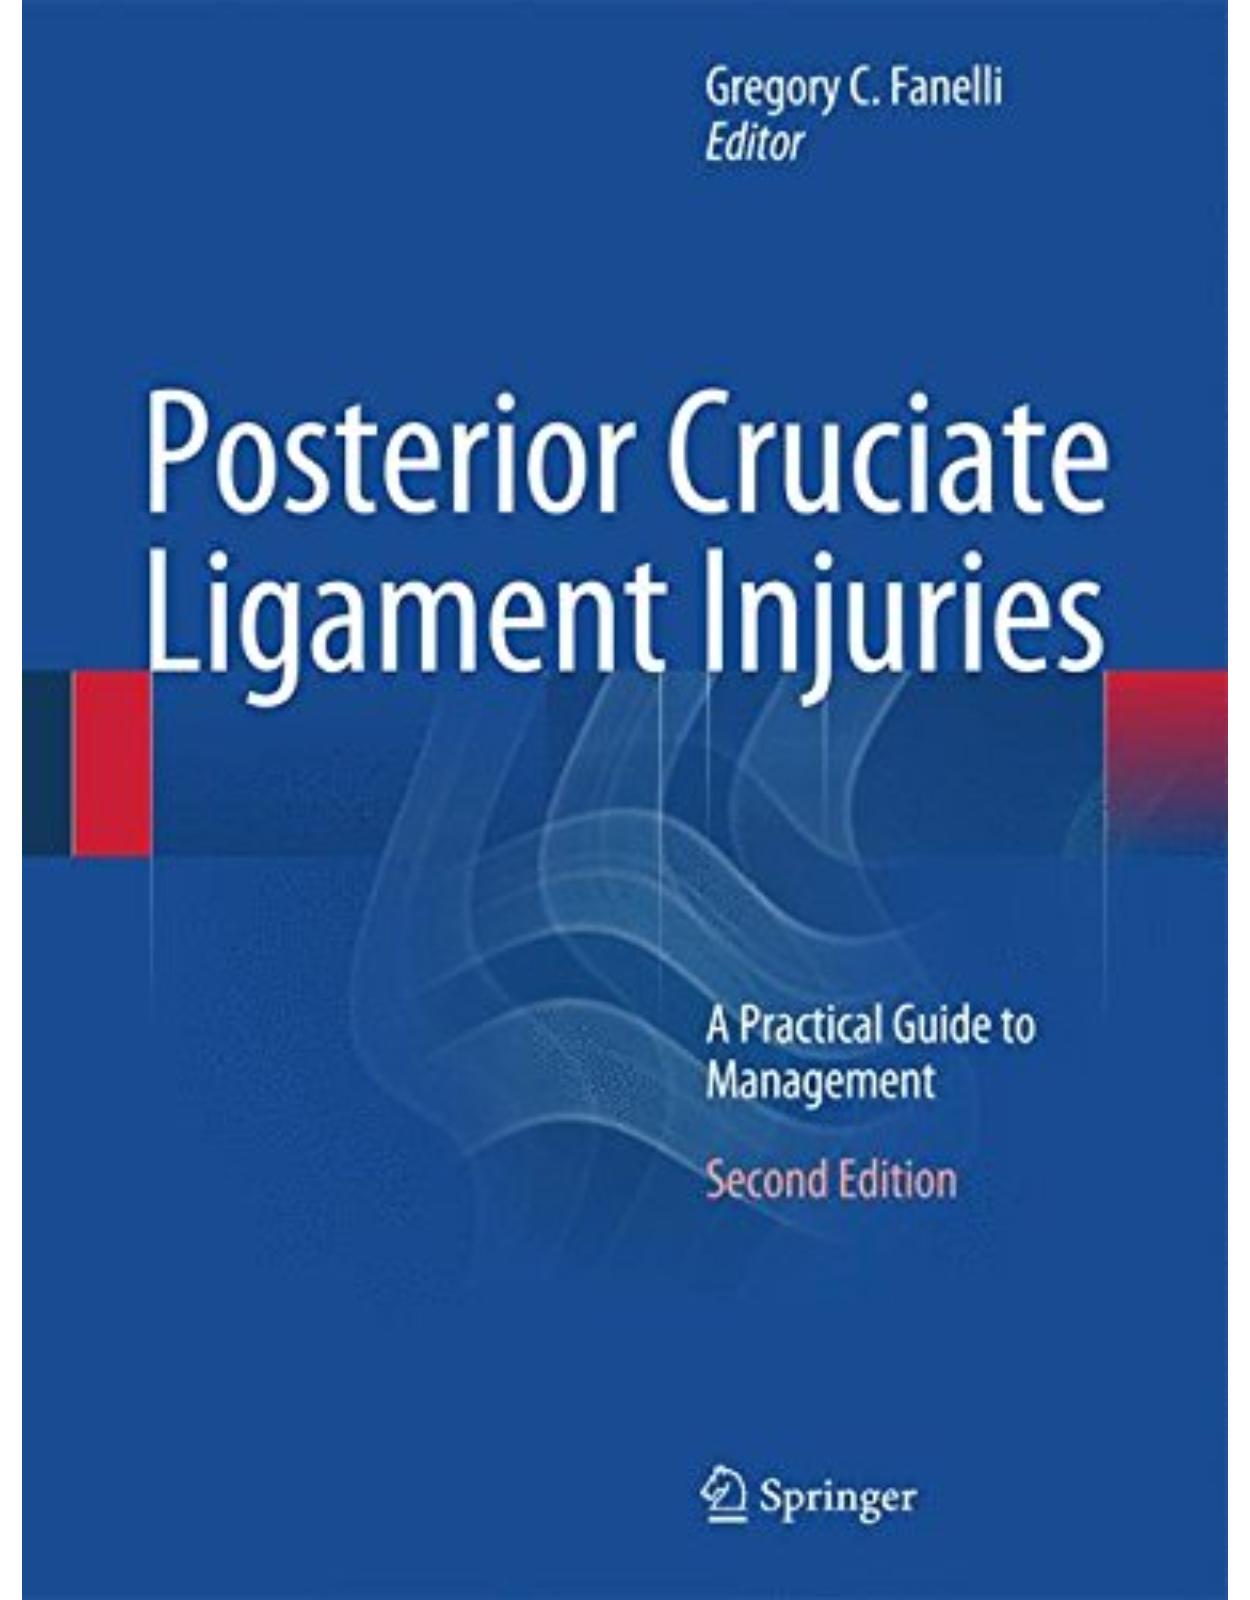 Posterior Cruciate Ligament Injuries  A Practical Guide to Management